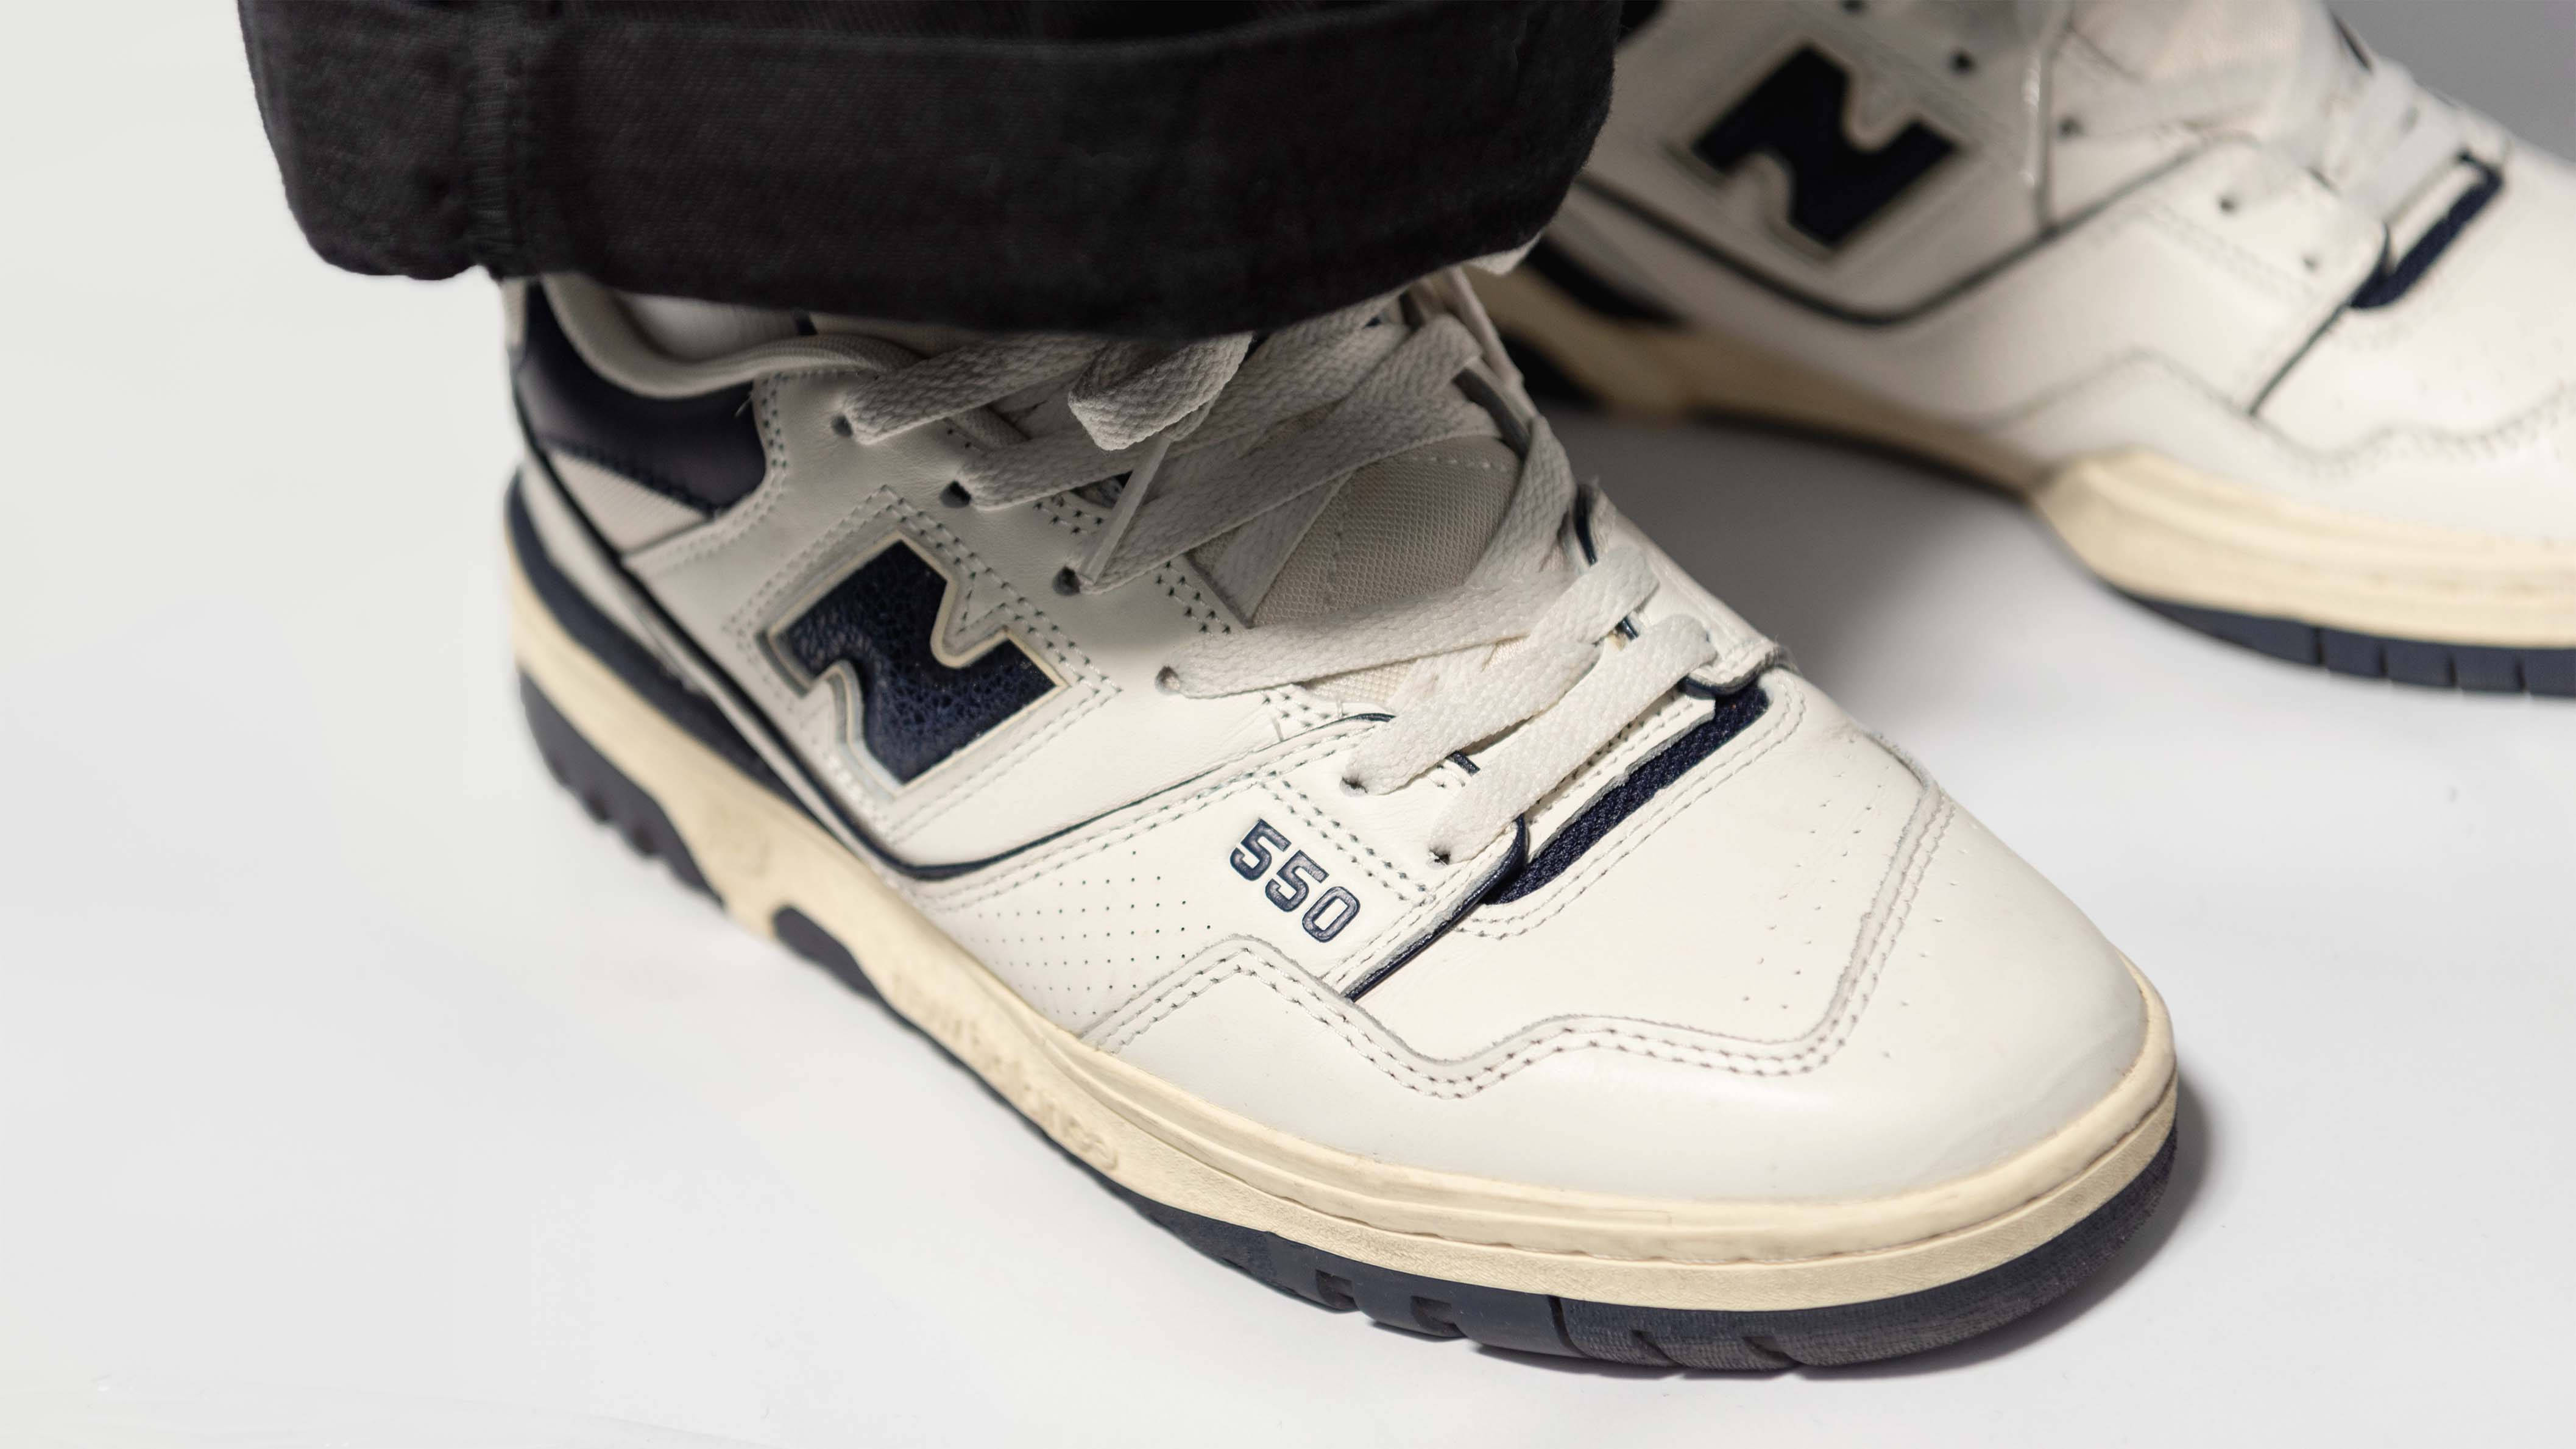 New Balance 550 Sizing: How Do They Fit? | The Sole Supplier